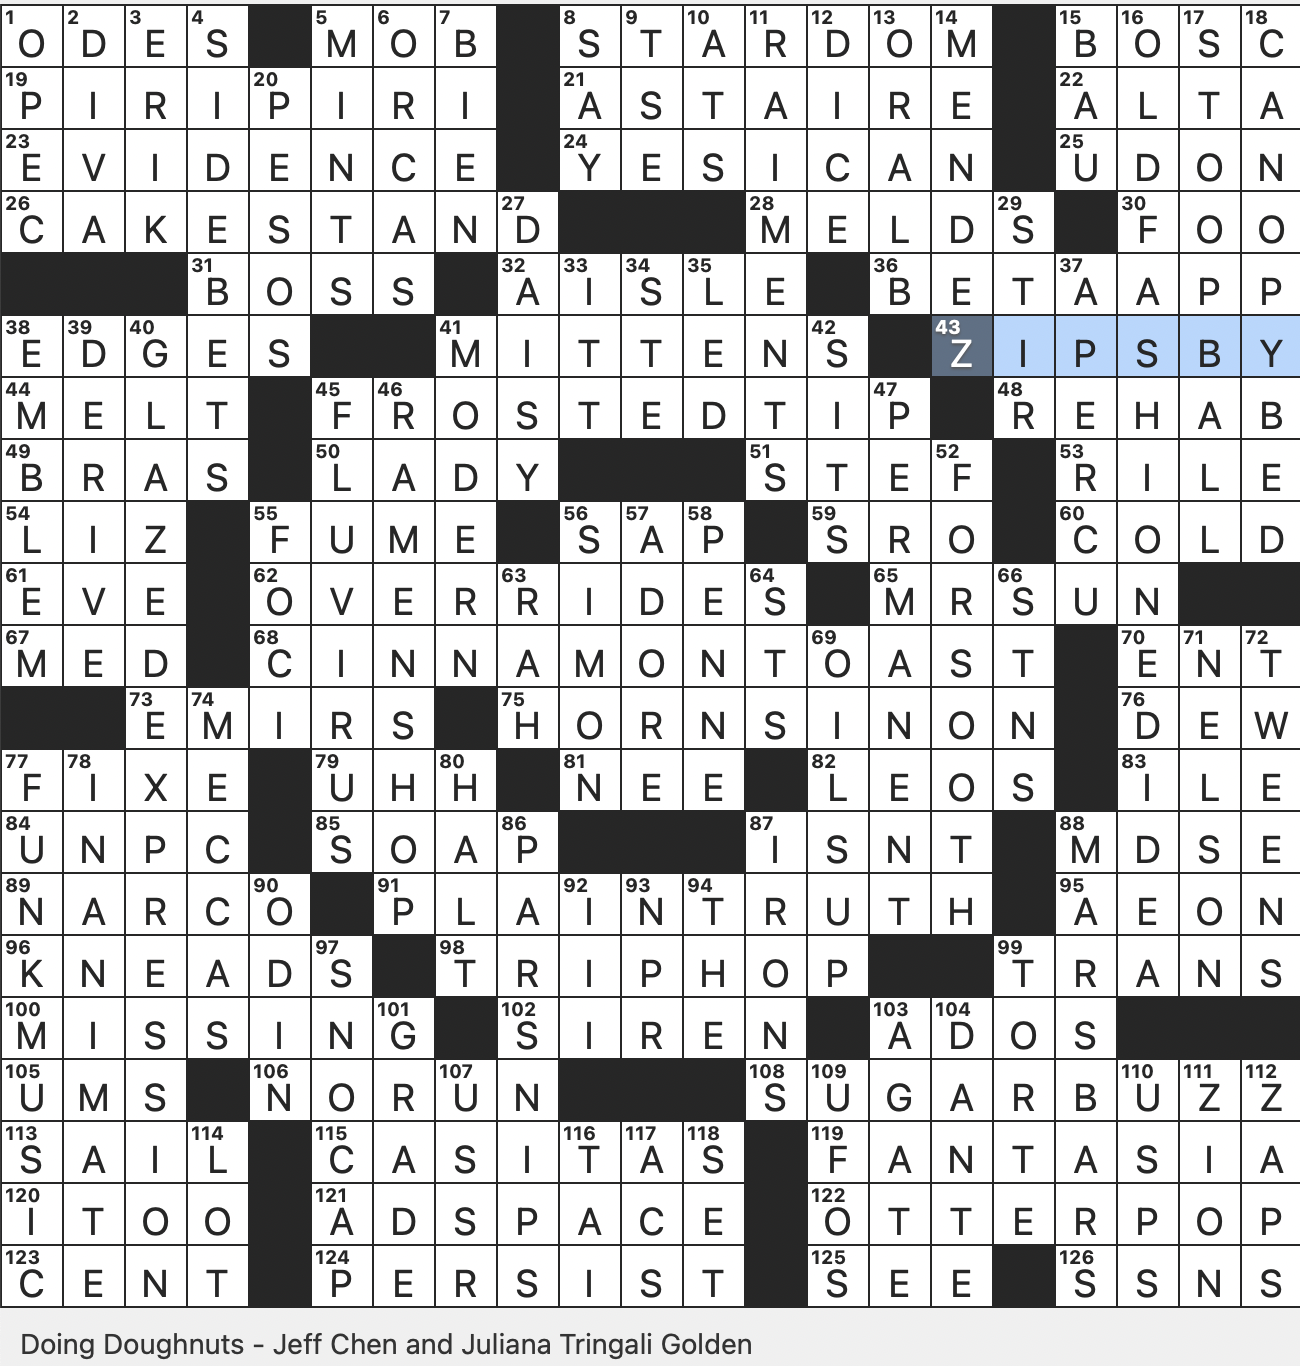 Rex Parker Does the NYT Crossword Puzzle: Office-sharing system in modern  lingo / SAT 2-8-20 / Easy kill in Fortnite say / They get big bucks from  Bucks